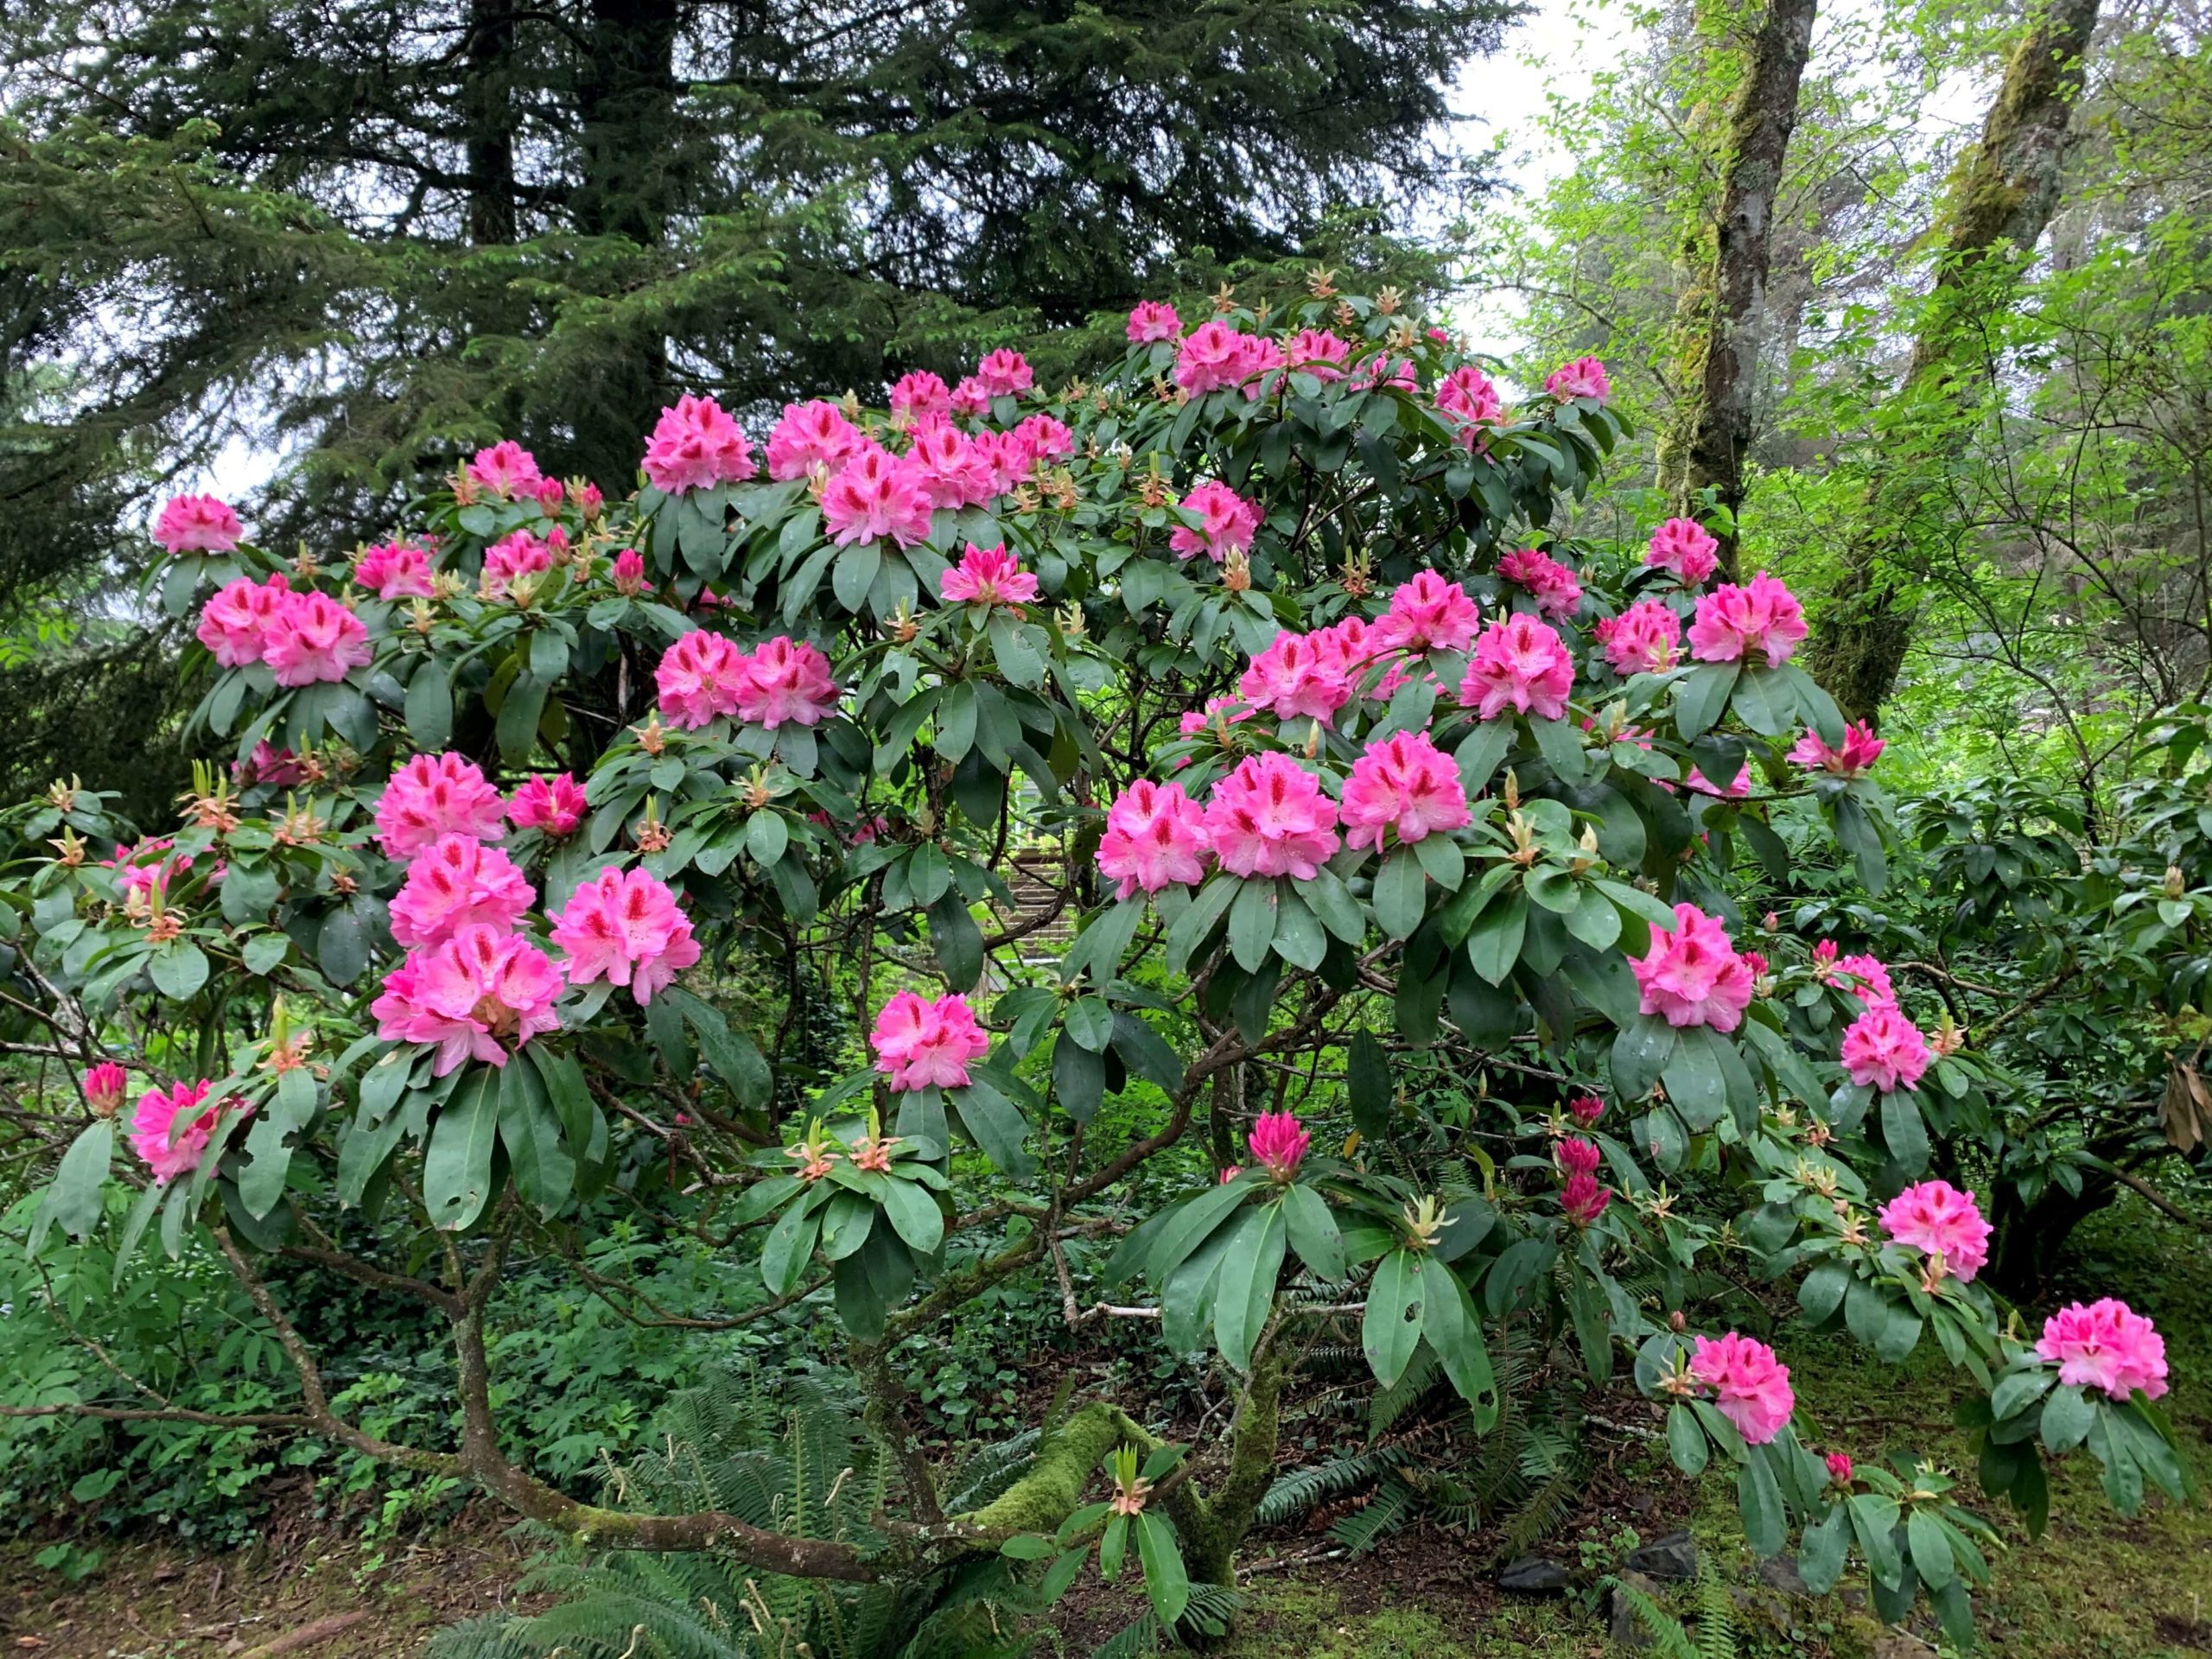 Blooming Rhododendrons at The Inn at Otter Crest. 